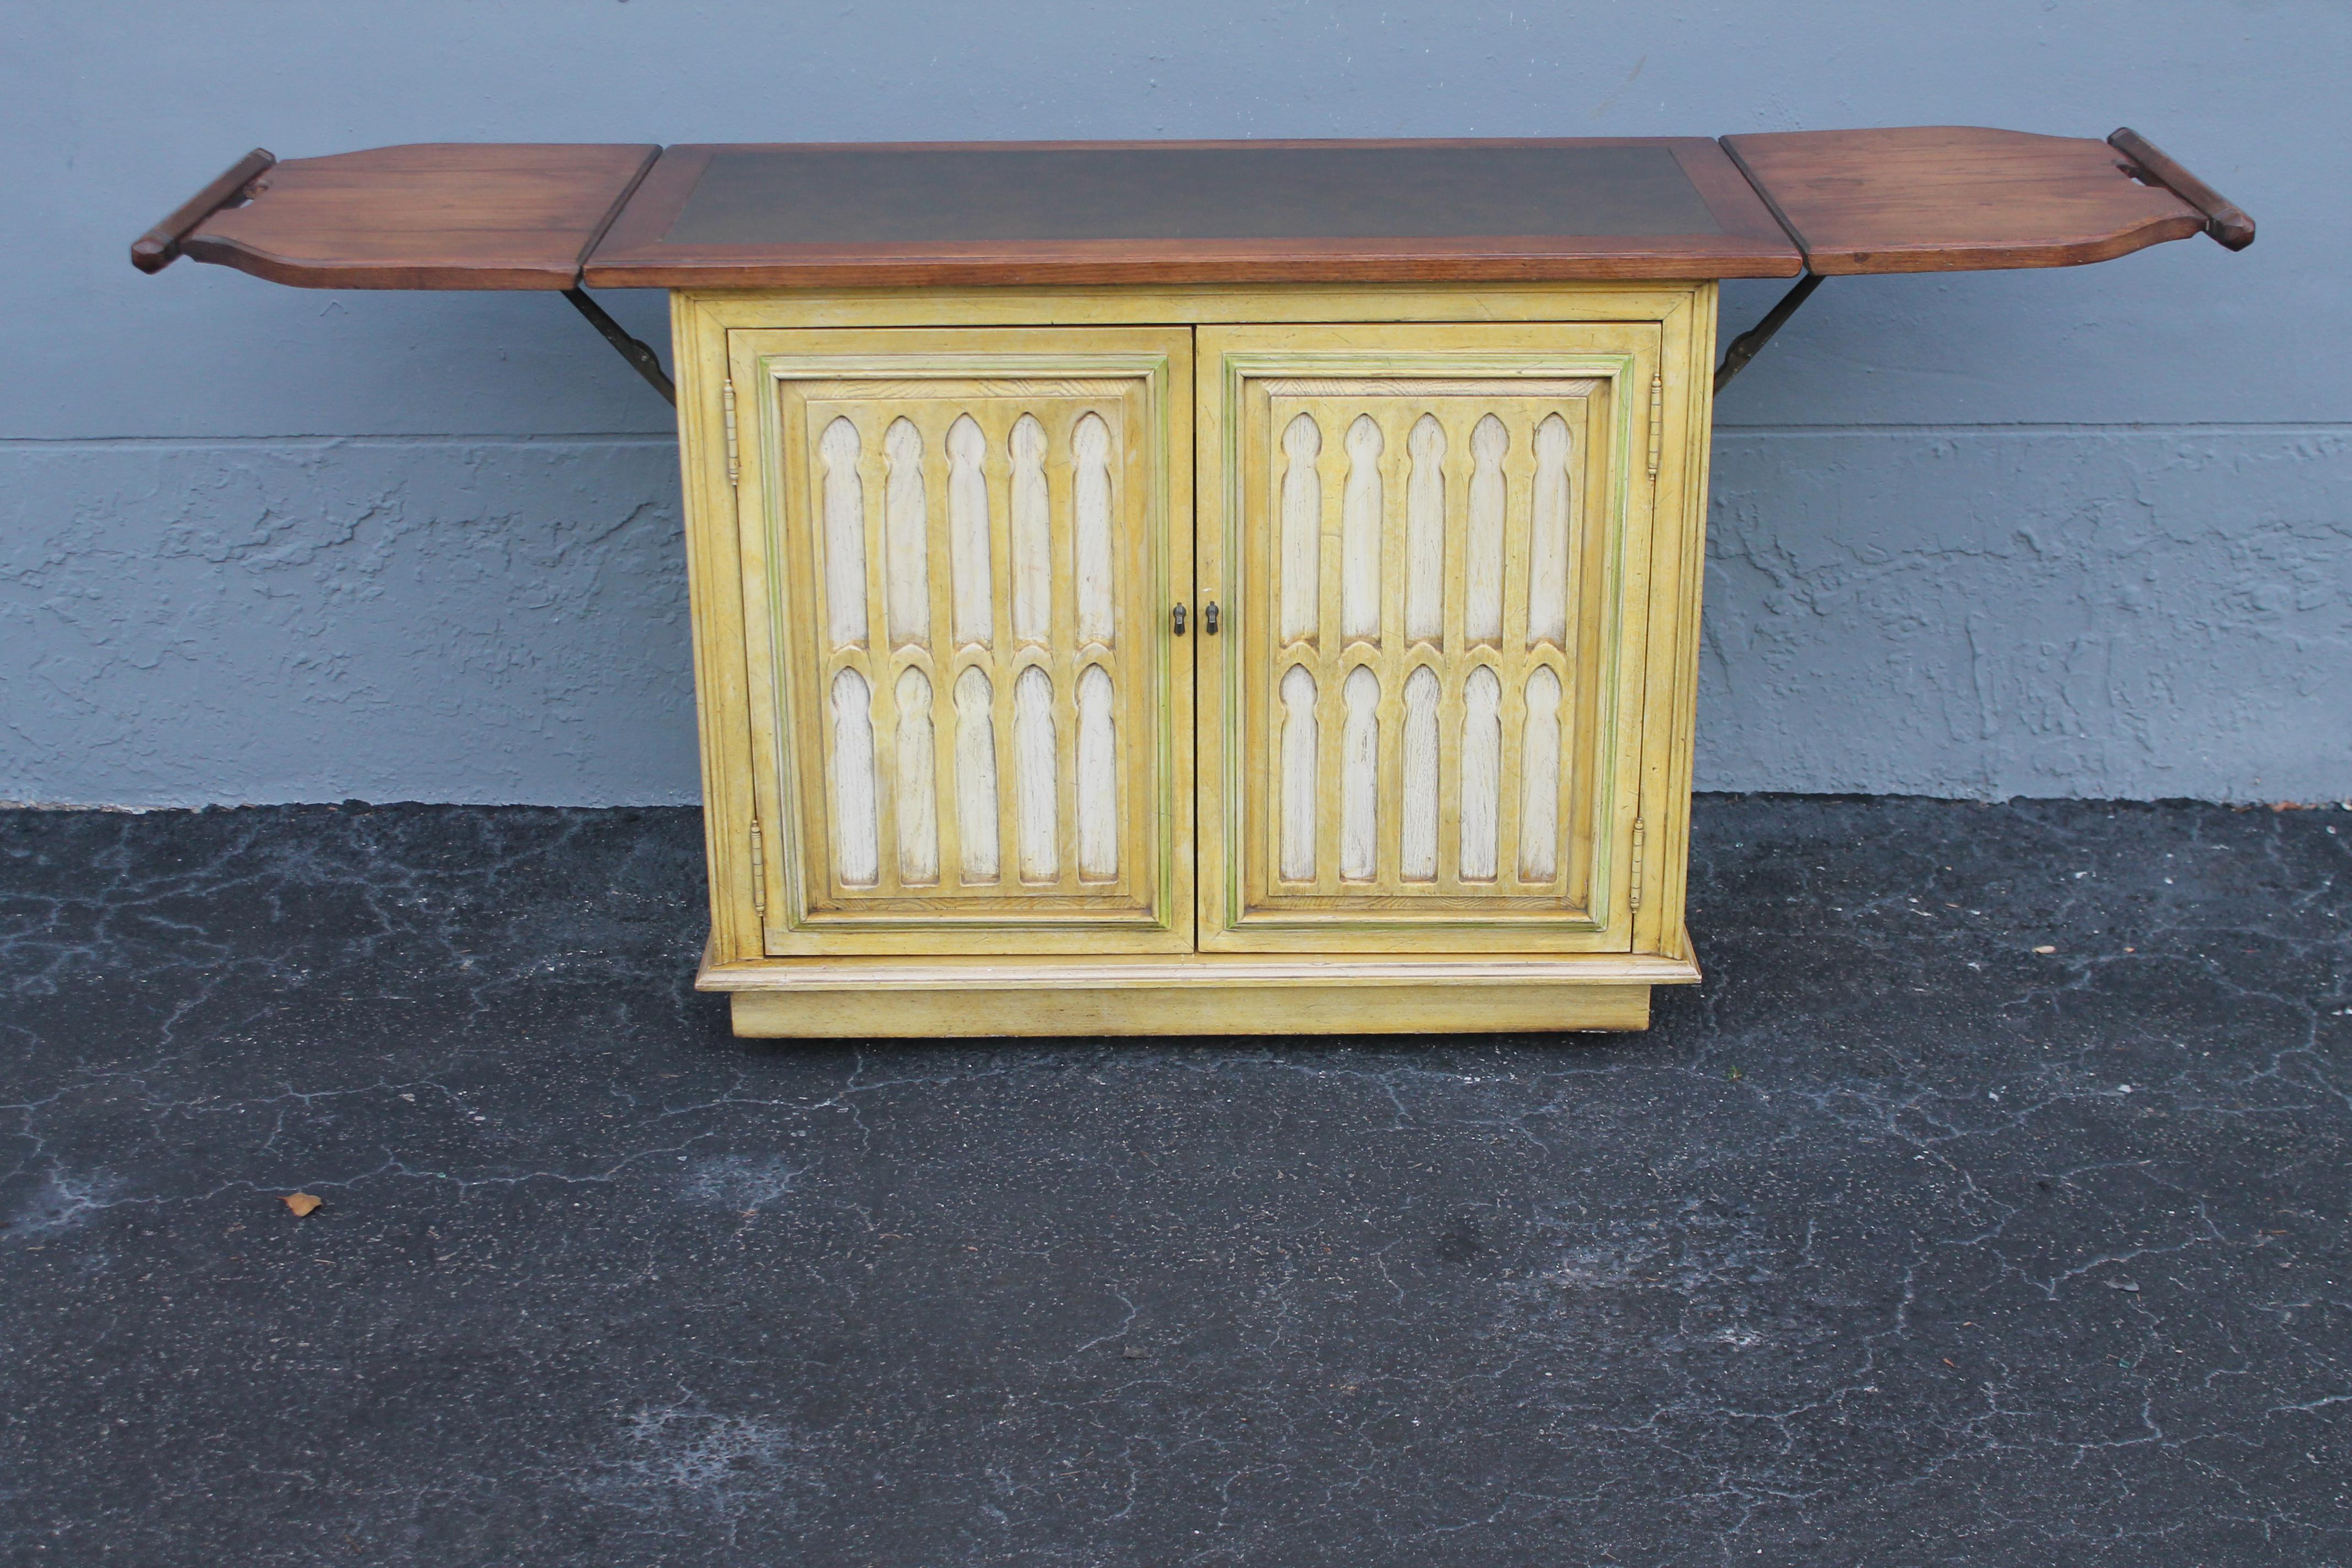 Vintage Rolling Dry Bar/ Cabinet. The dry bar has flaps on both side which when raised make the length 71